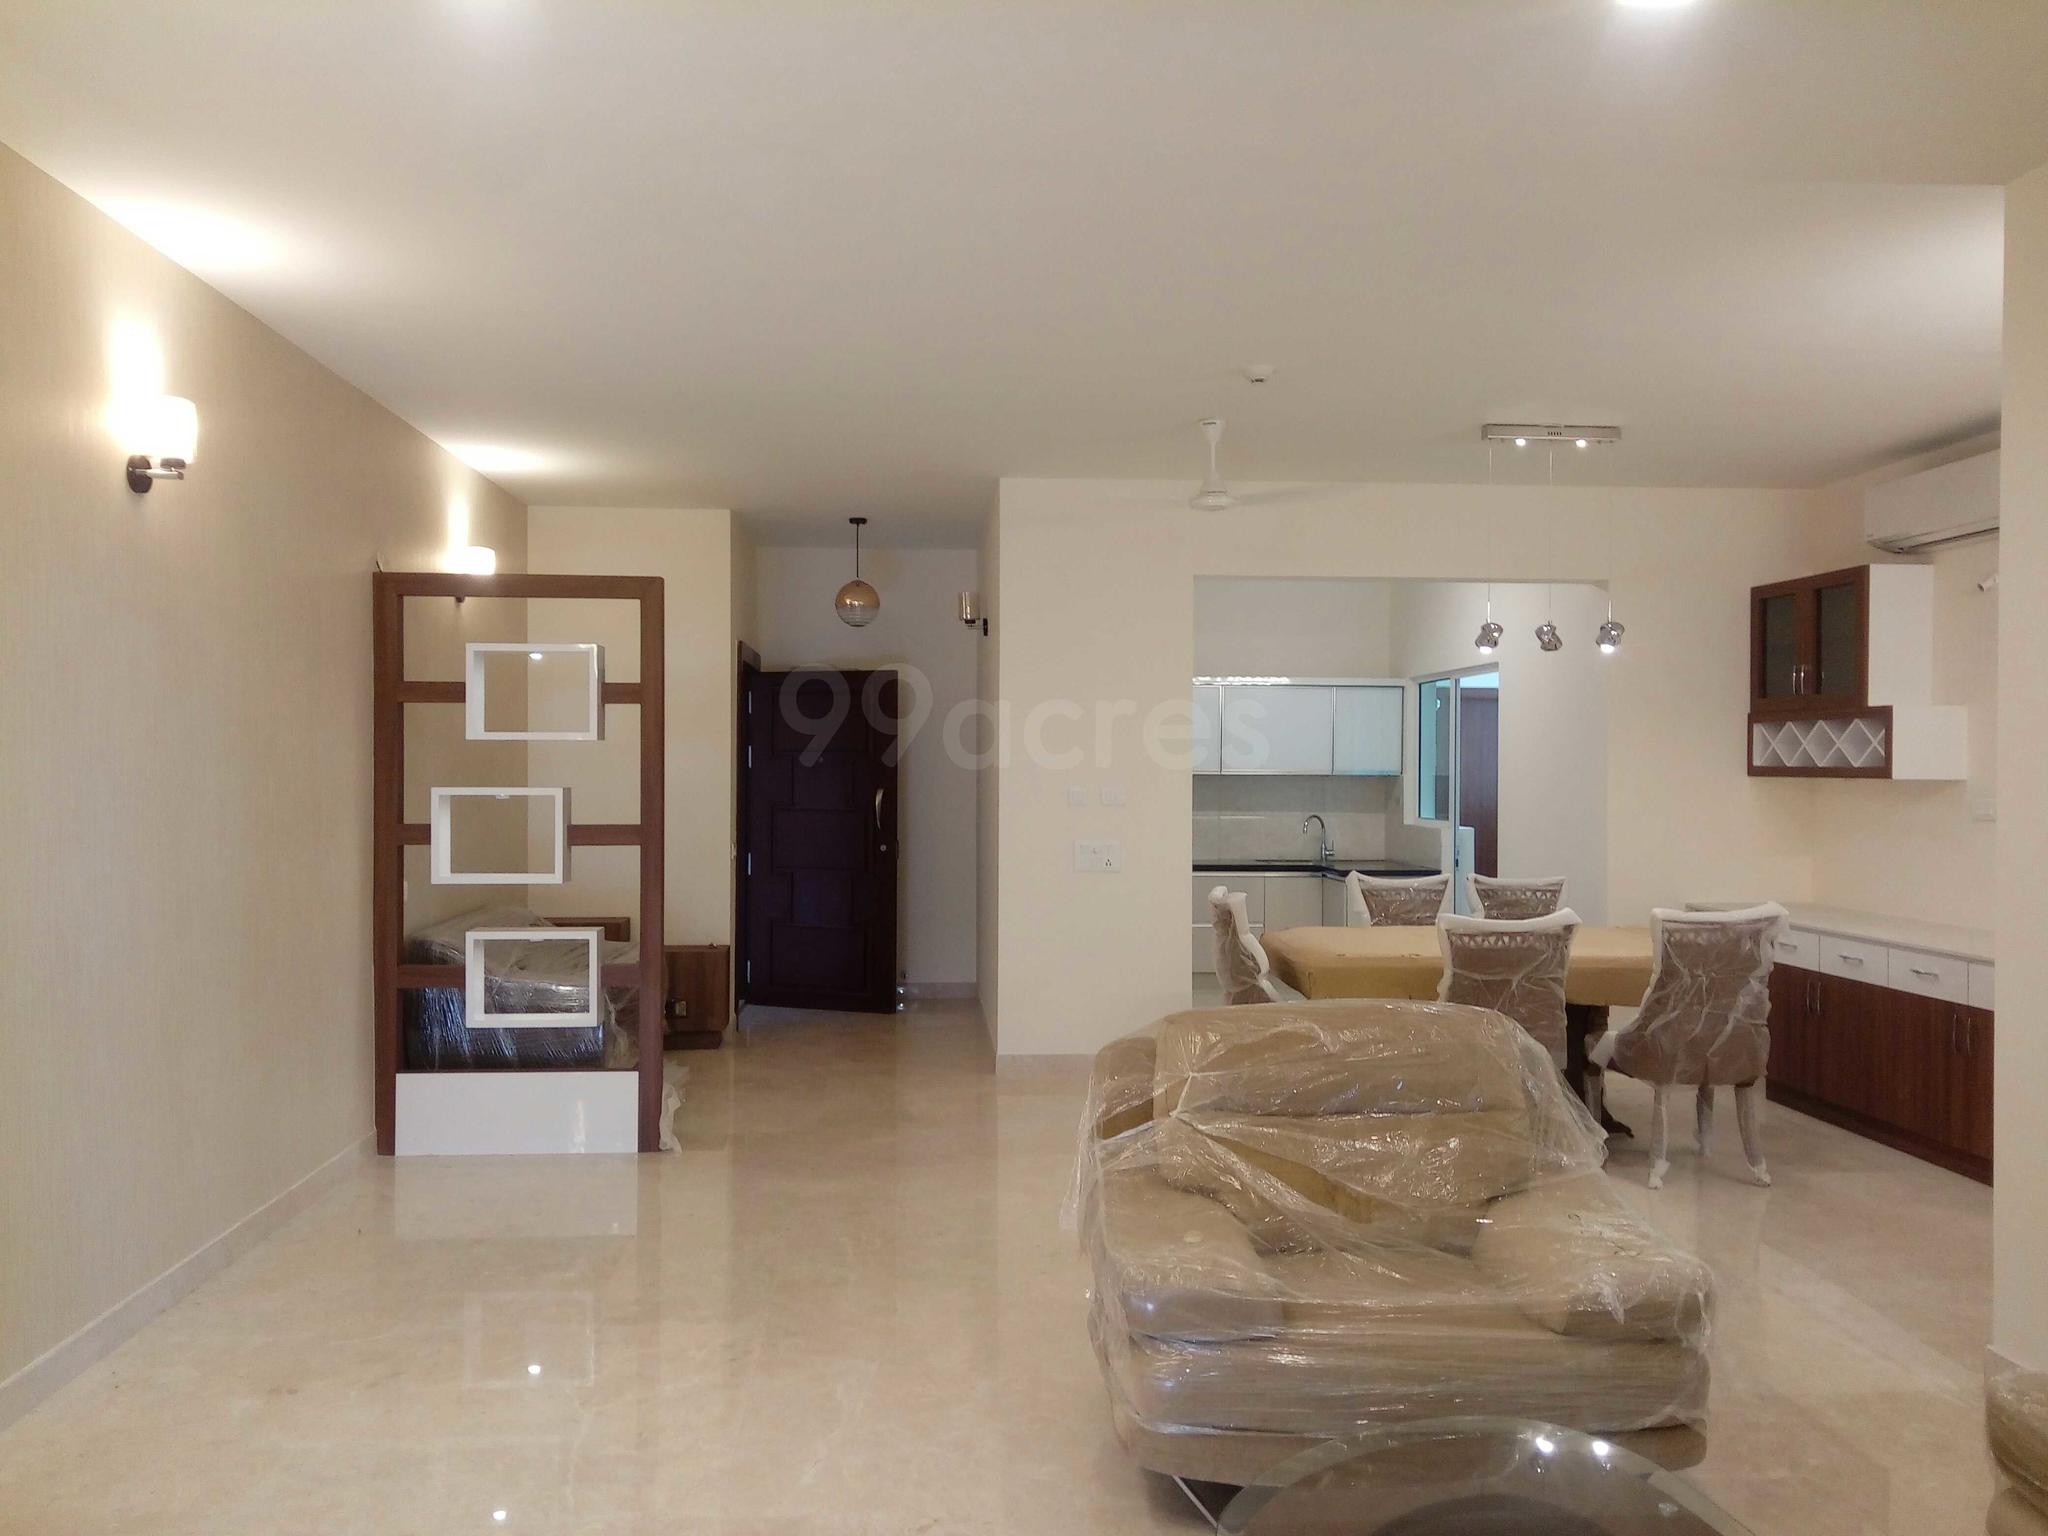 Hebbal: Beautiful 3 bedroom furnished flat for sale